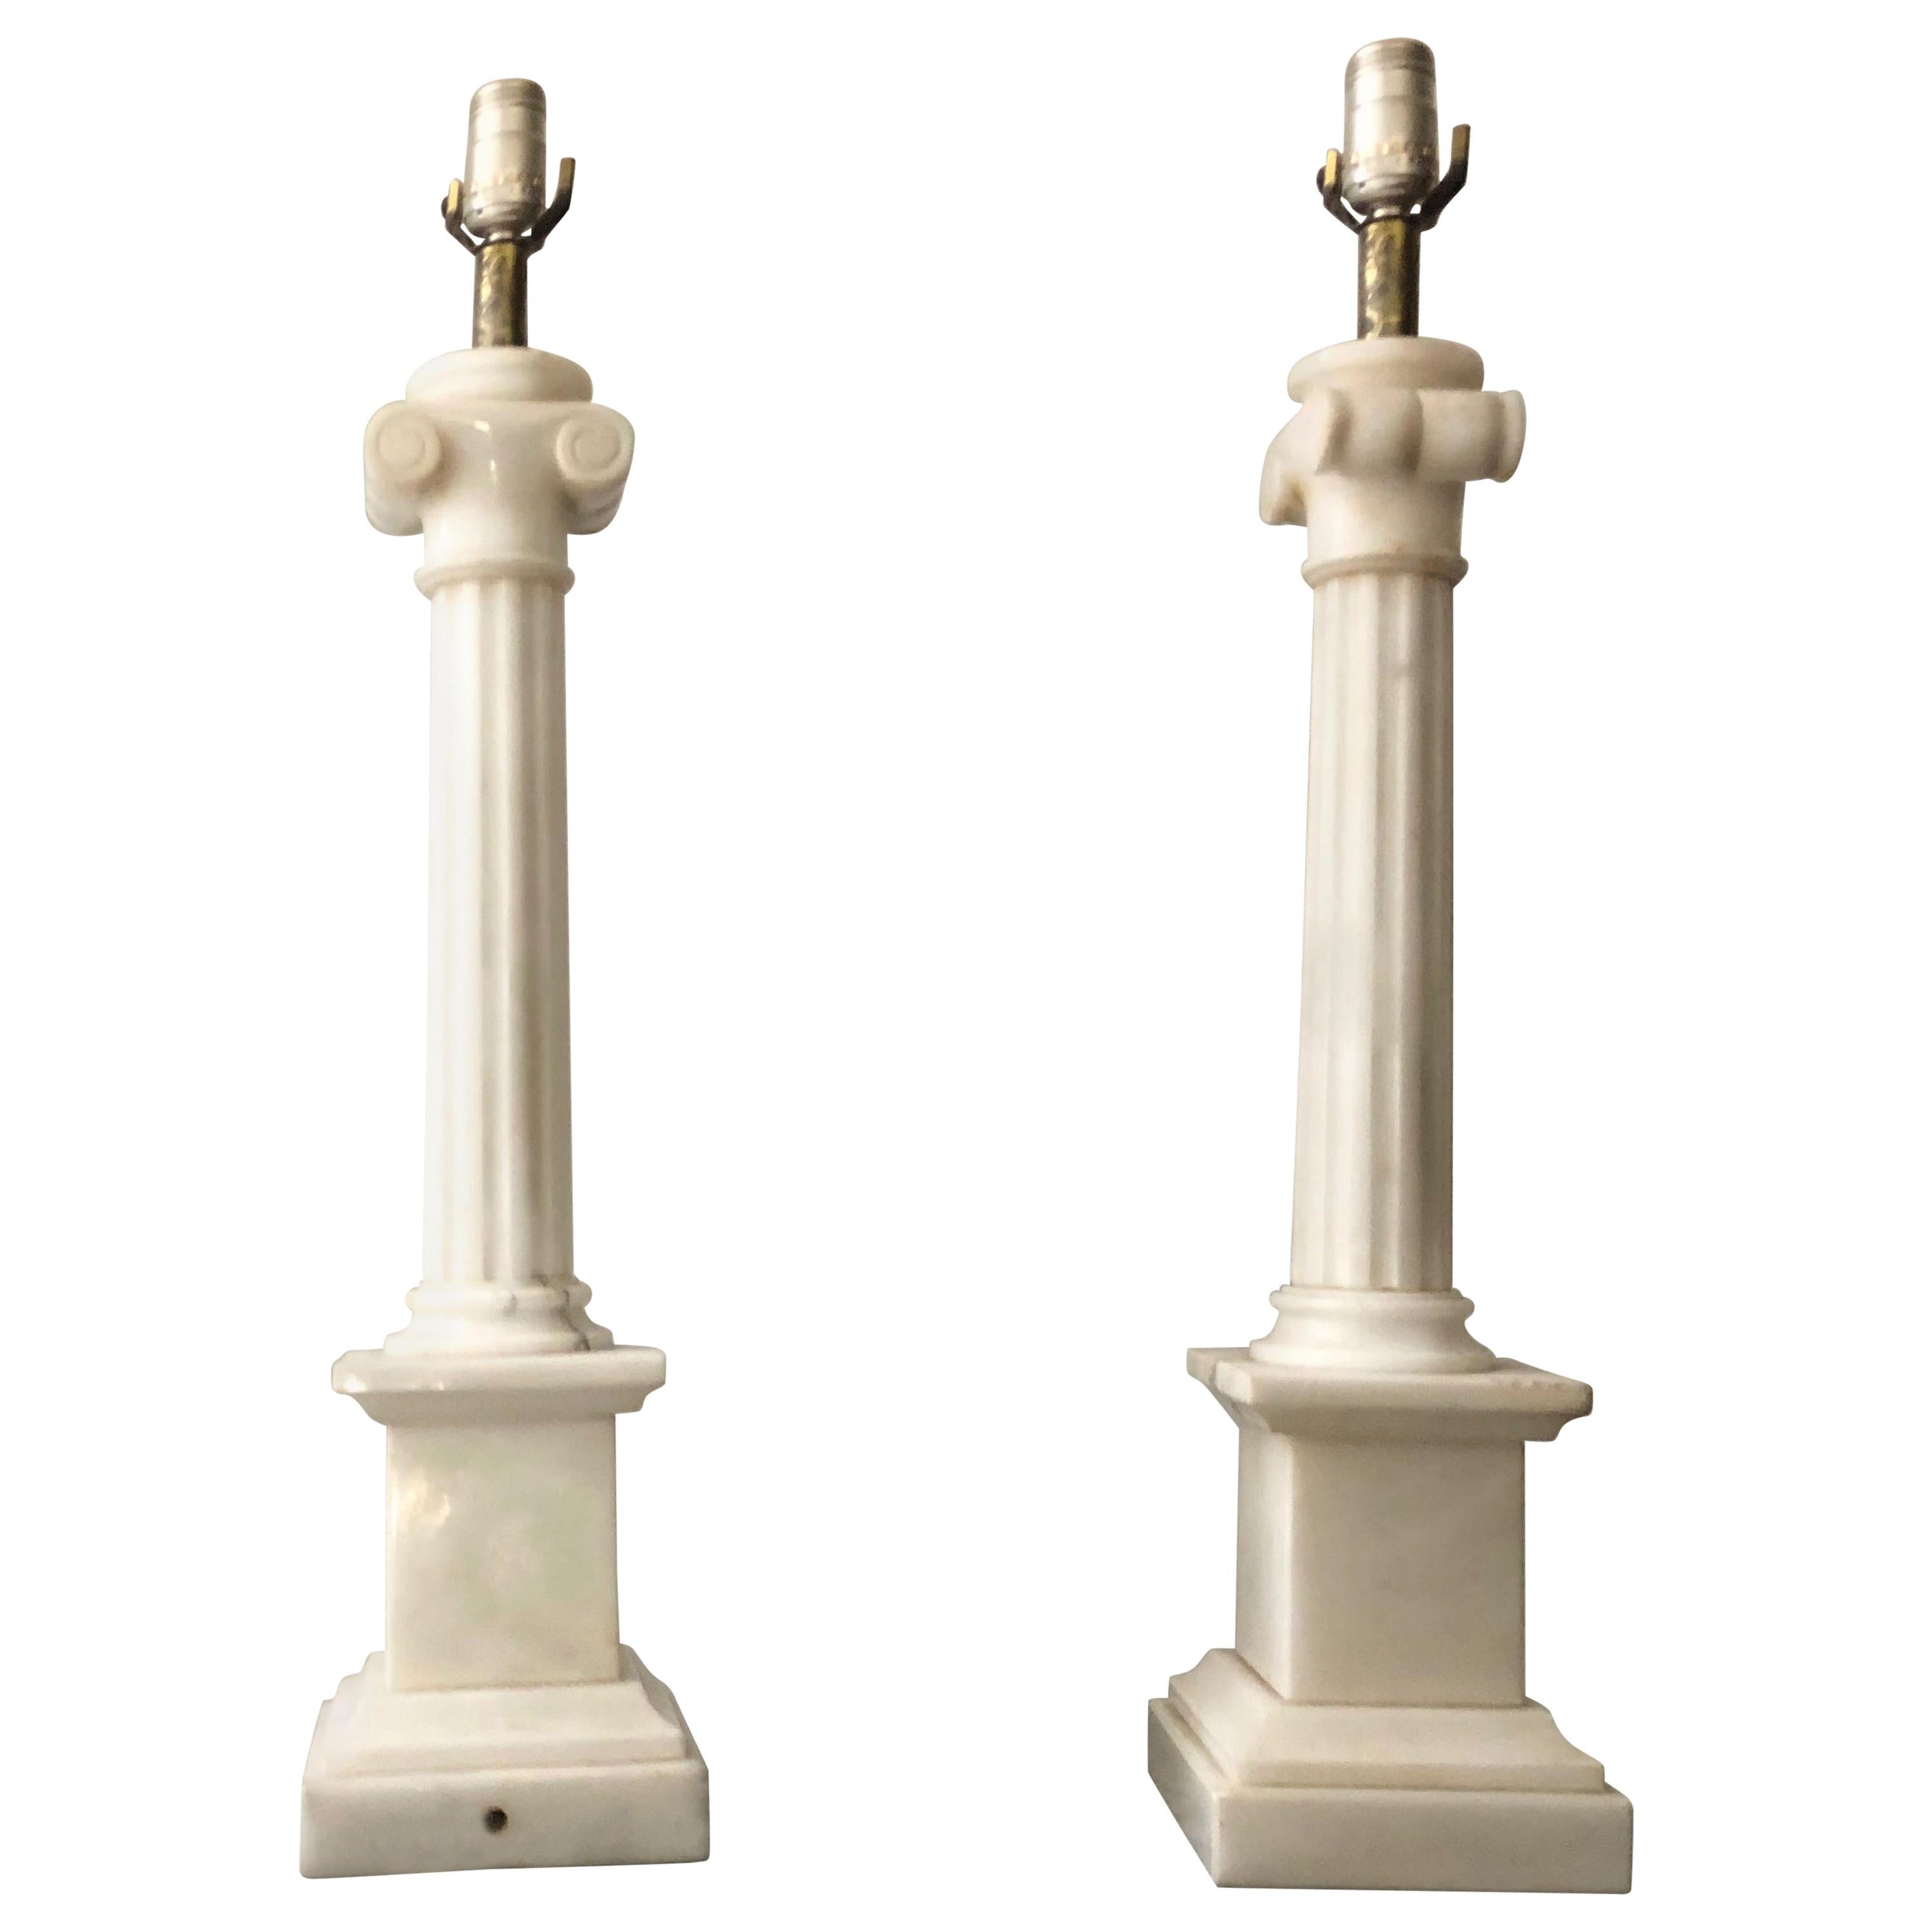 American Midcentury Neoclassical White Marble Ionic Column Table Lamp, 1960s Marbro Lamp